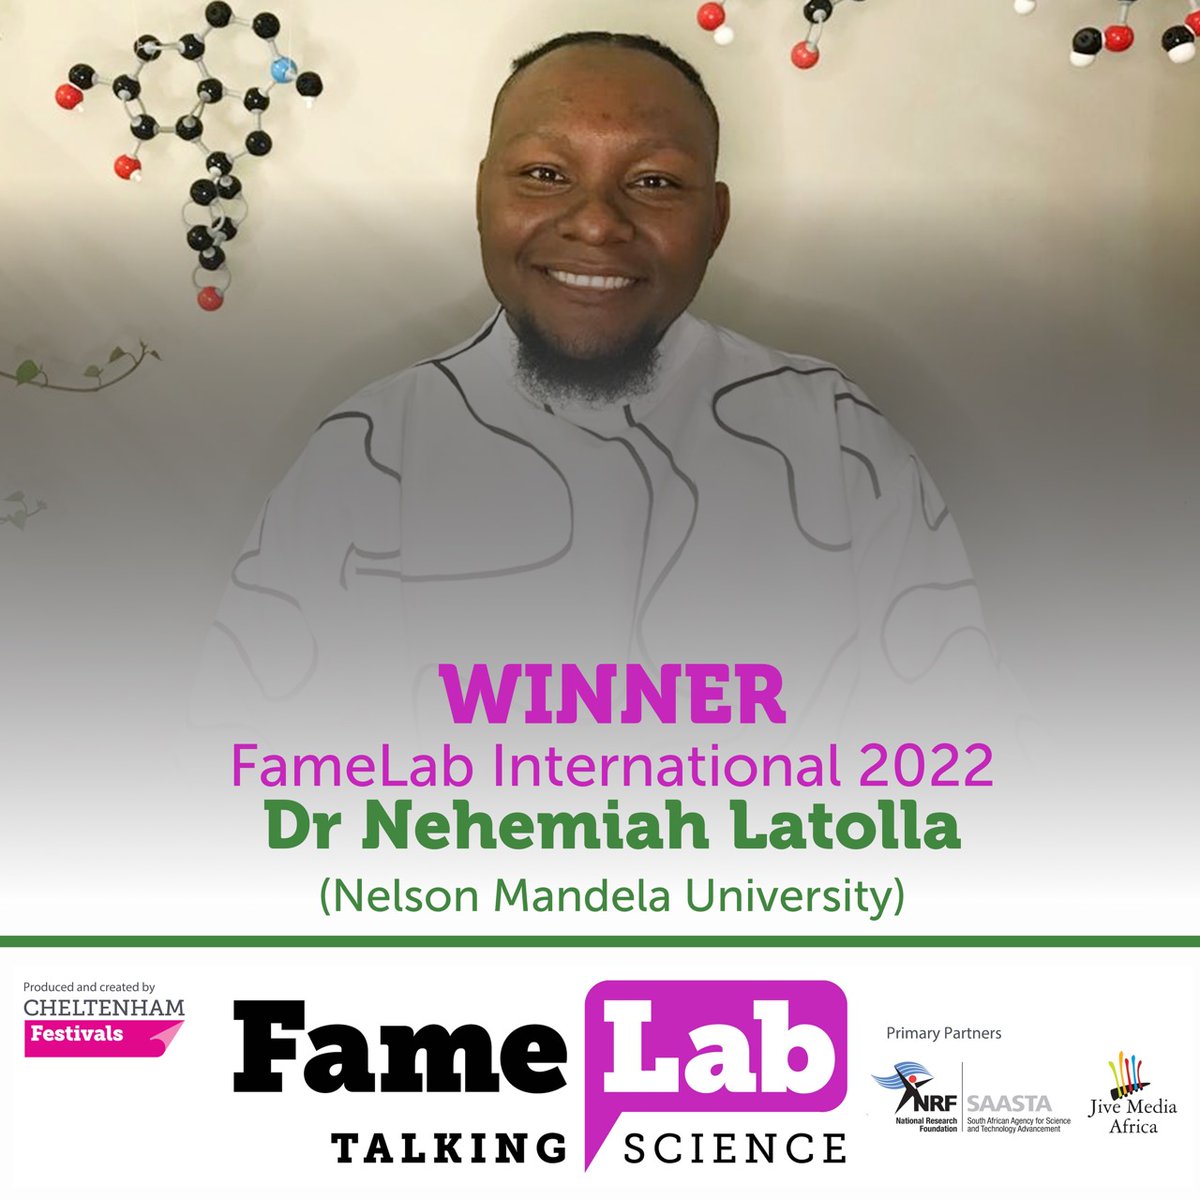 Wisdom of the ages - Dr Nehemiah Latolla has brought  African indigenous knowledge into the spotlight to win the #FameLabInternational2022 competition!  #diabetes #TalkingScience #ActivateAfricanKnowledge